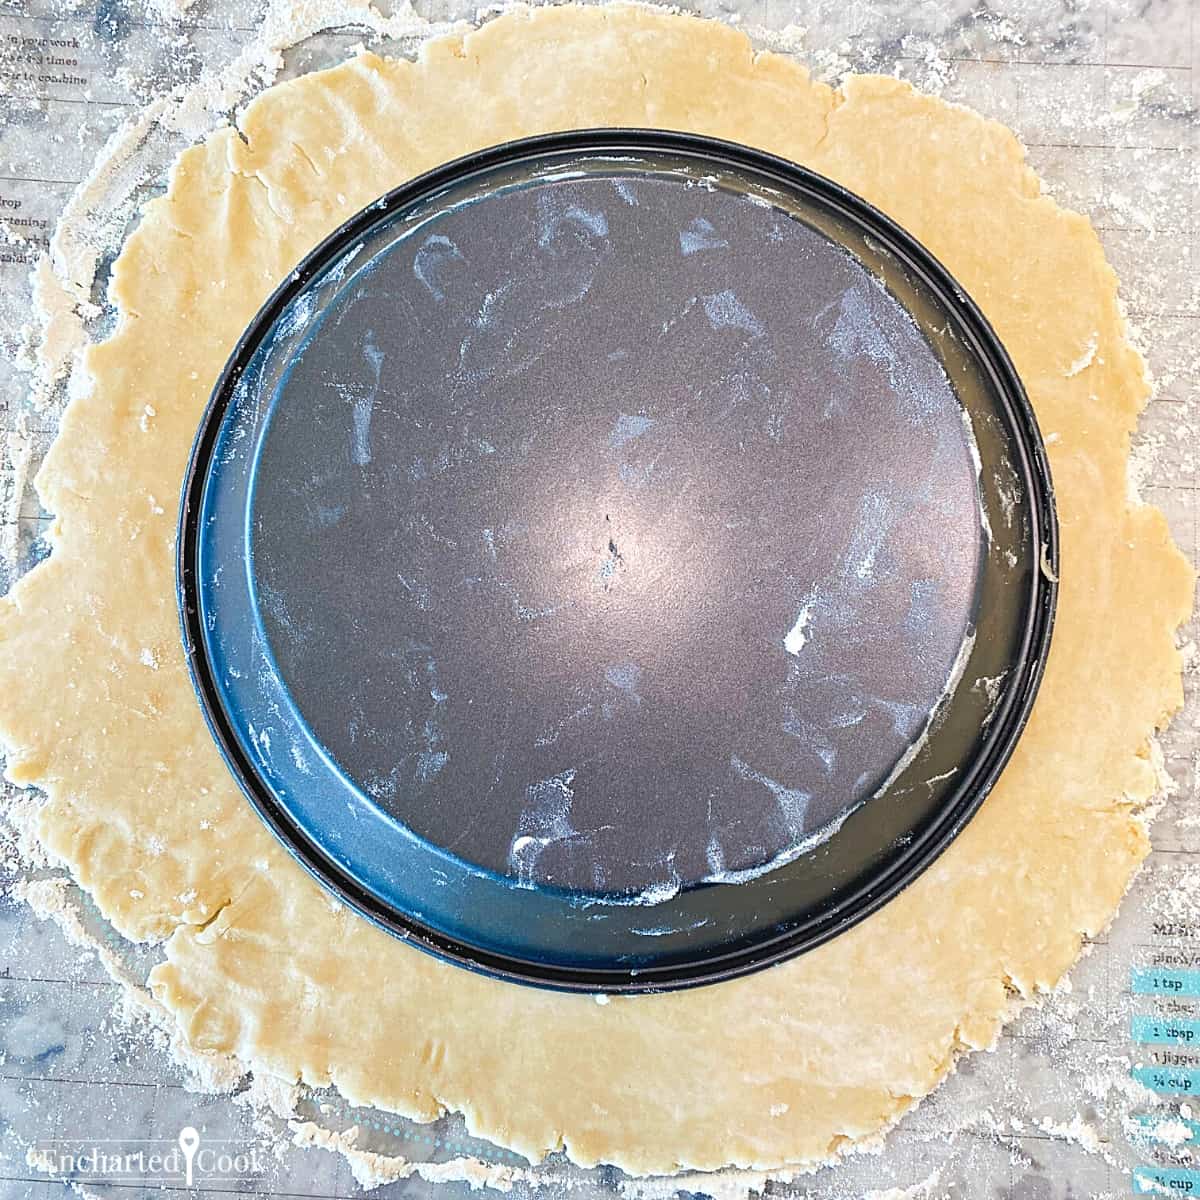 Inverted pie pan to check for size of rolled out pie crust dough.